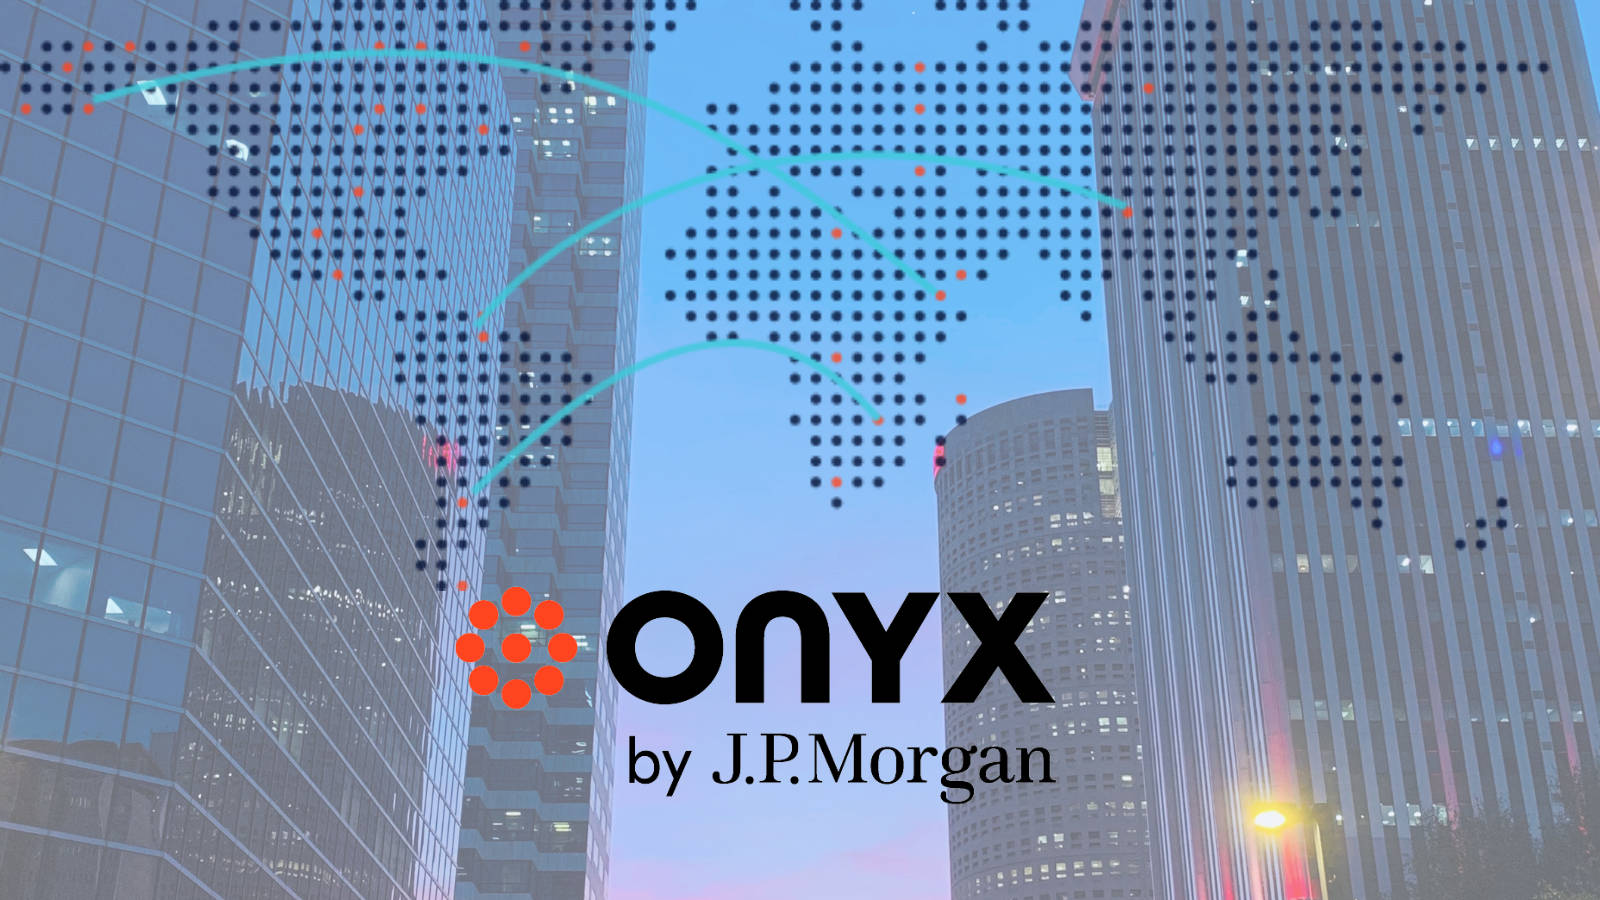 With Unveiling of Onyx Lounge, JPMorgan Steps into the Metaverse